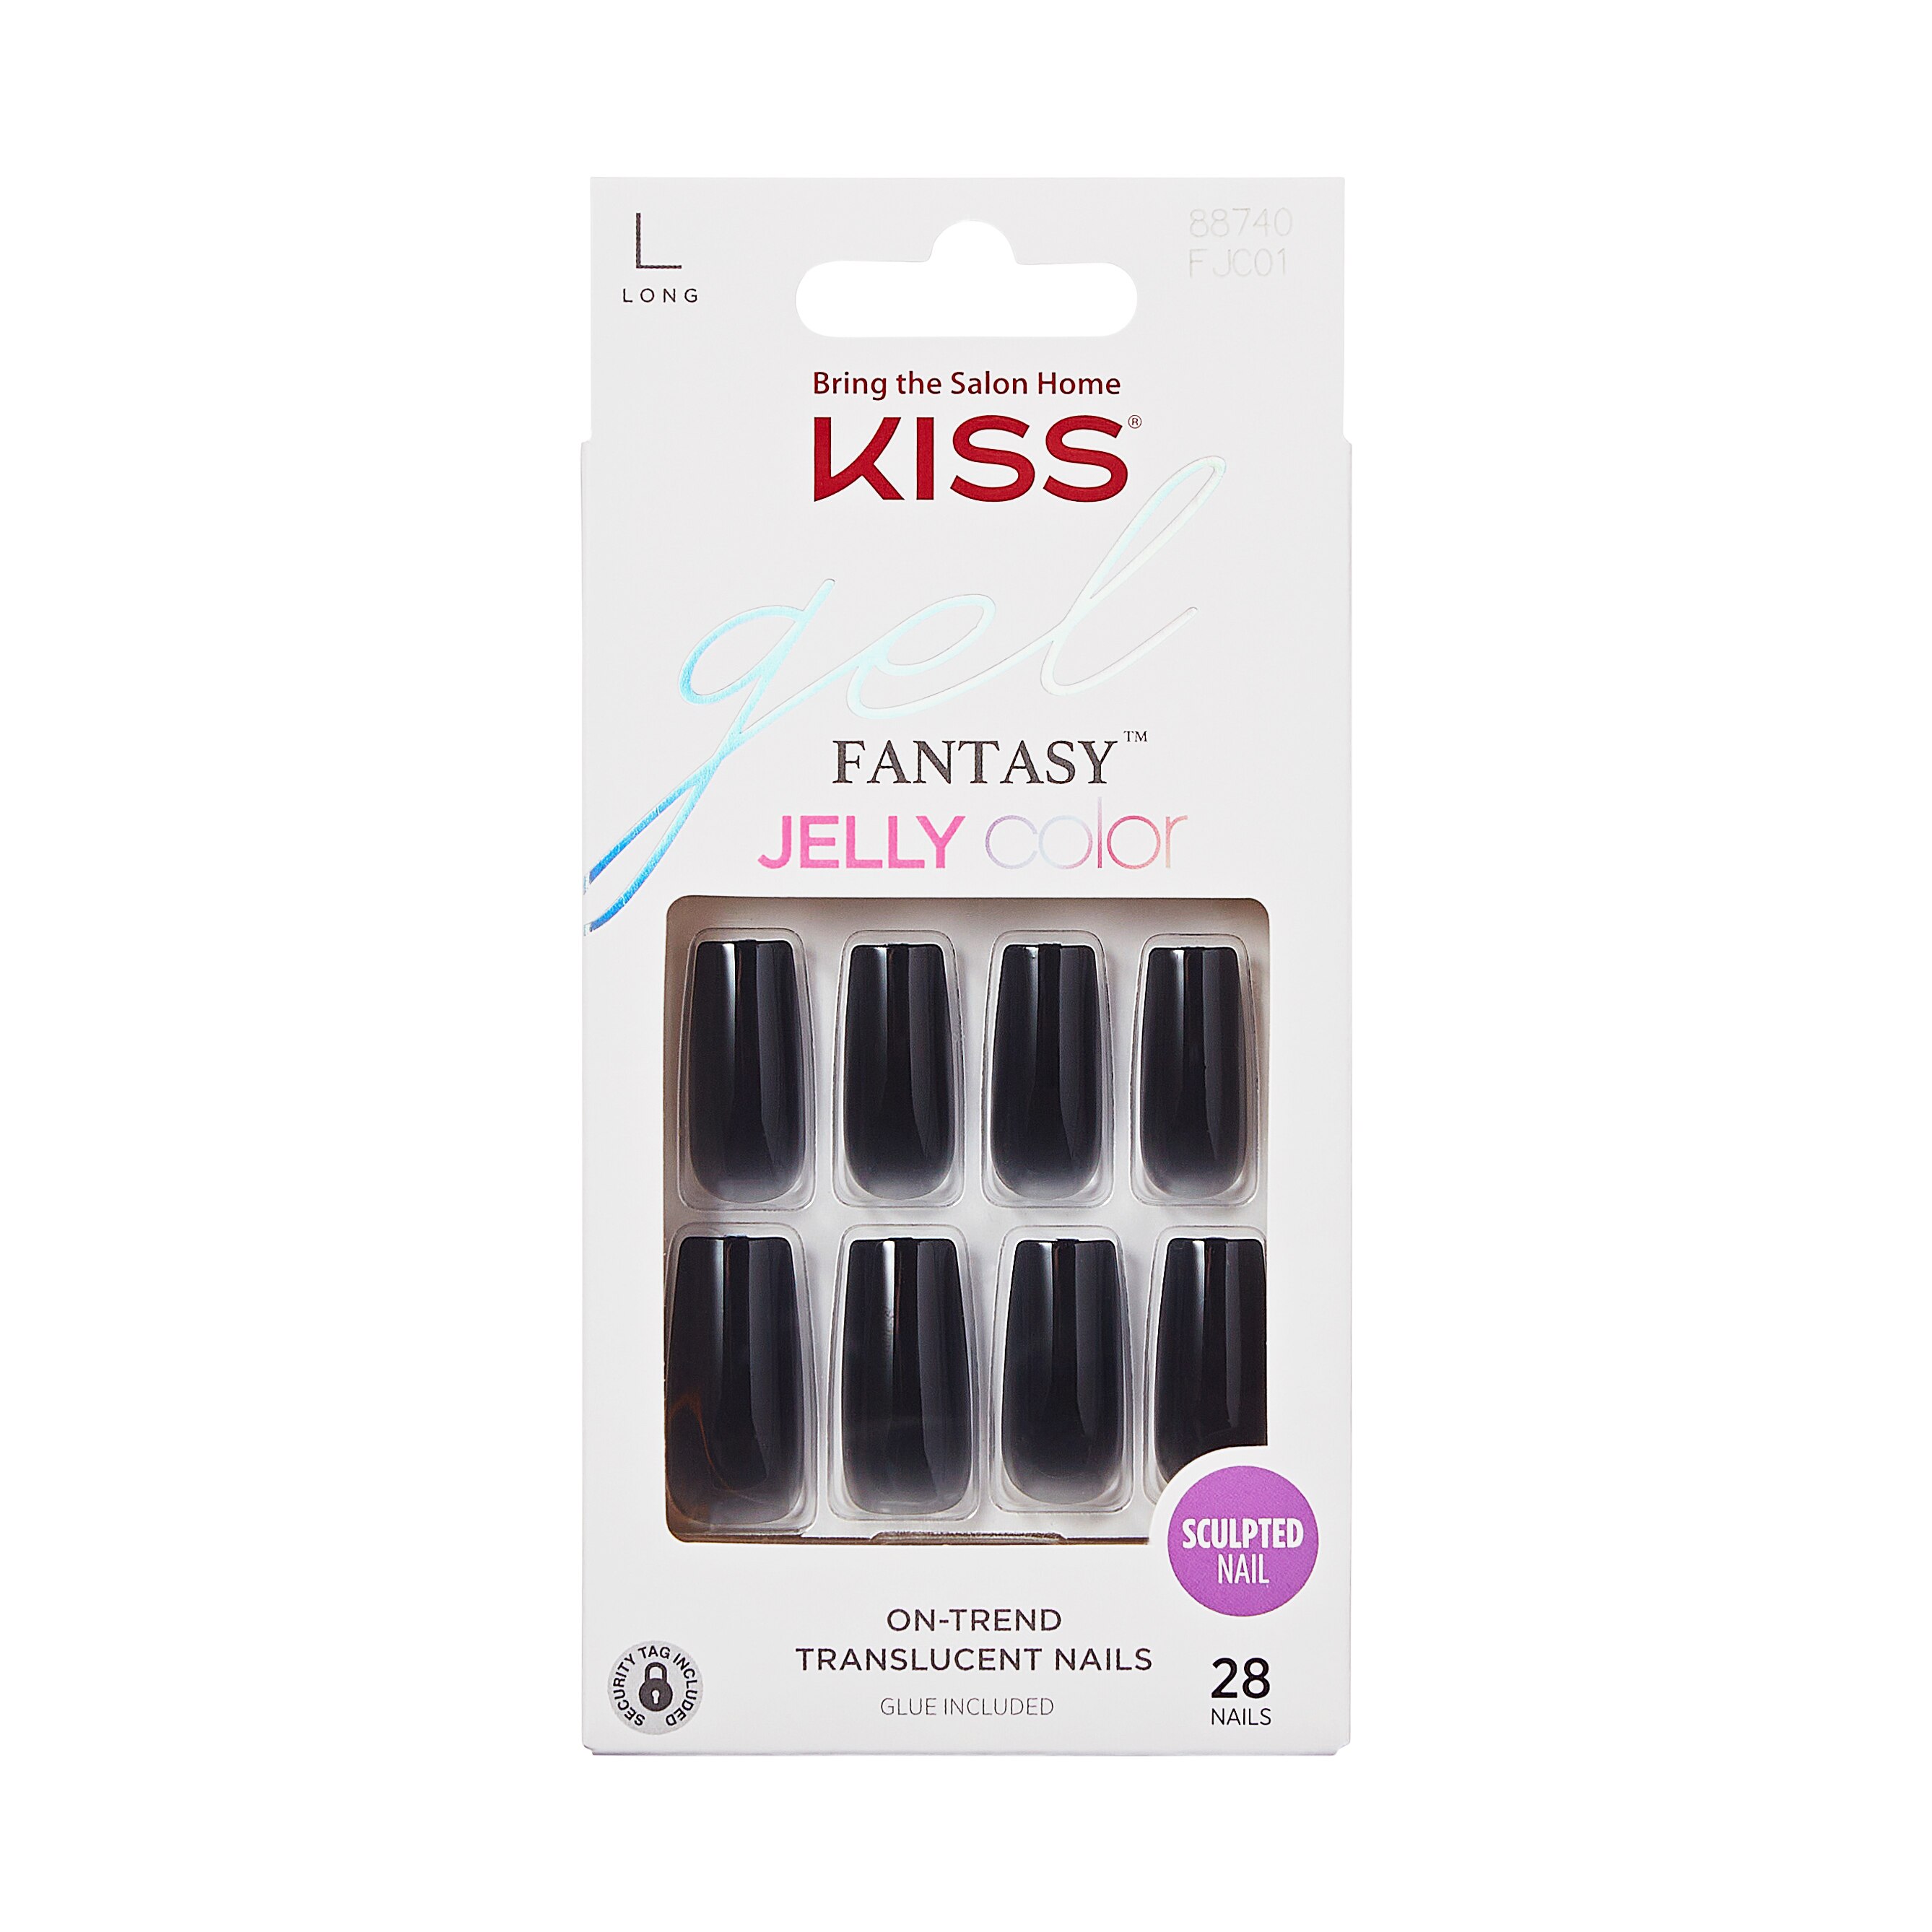 KISS Gel Fantasy Jelly Color Sculpted Fake Nails